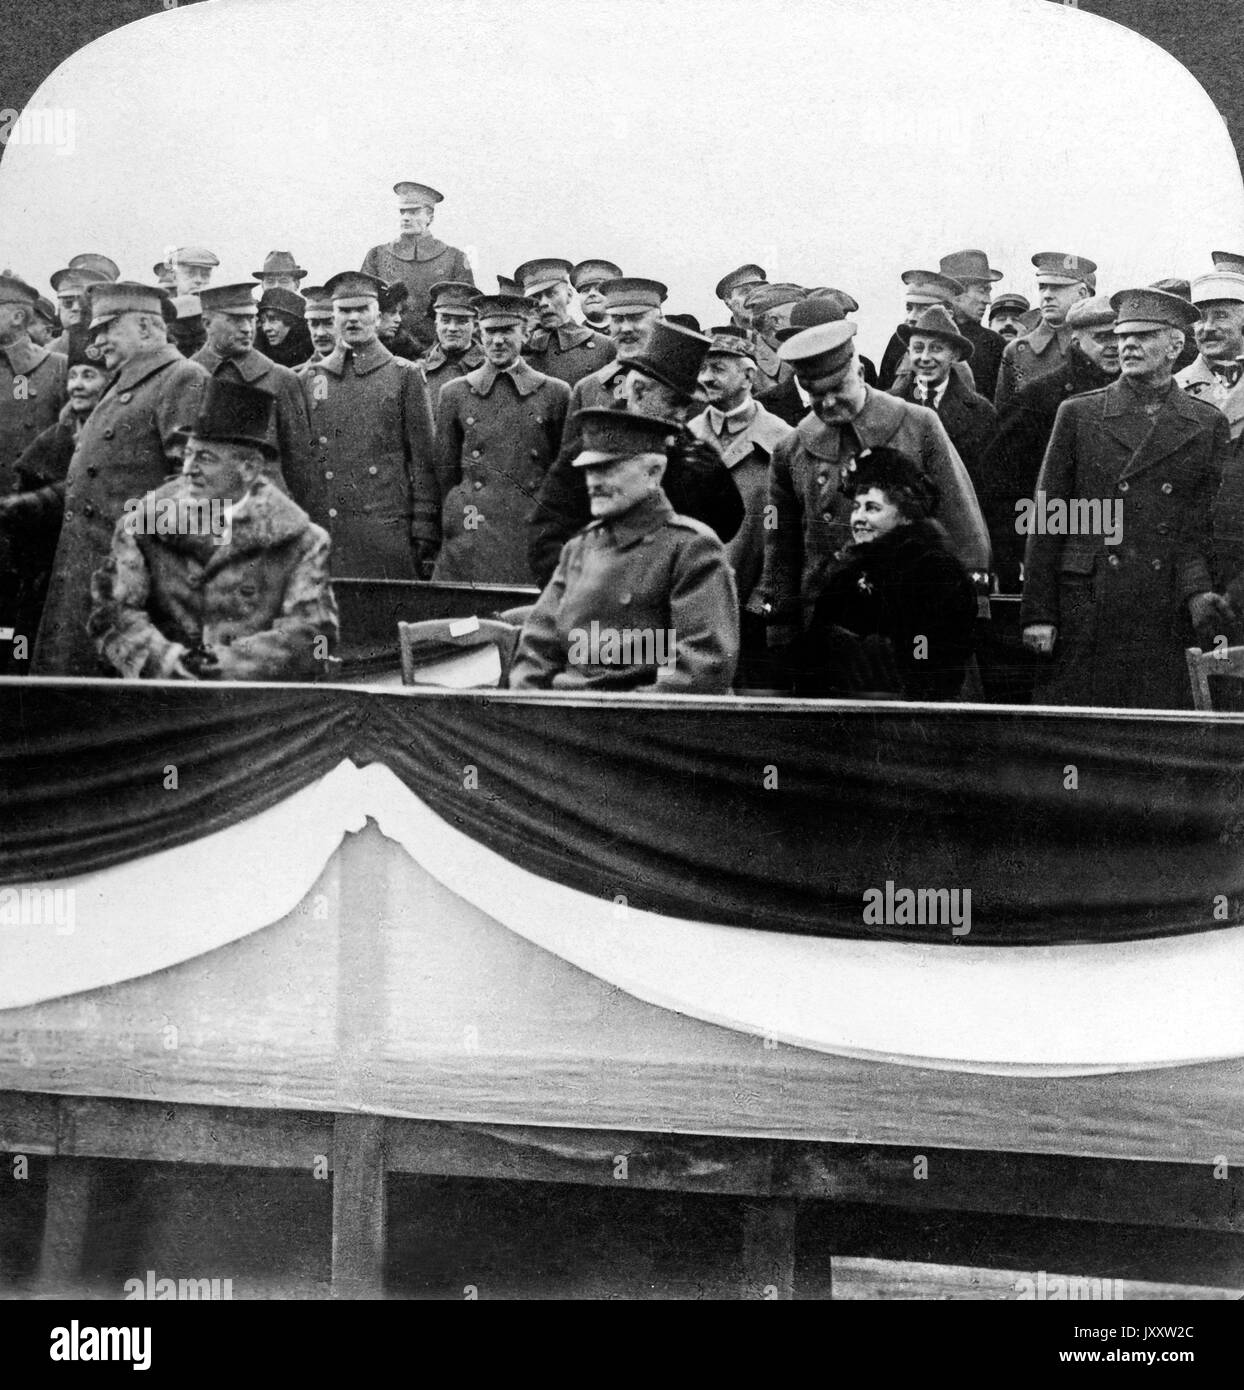 US Präsident Woodrow Wilson mit Frau, General John J. Pershing und Offiziere auf einer Tribüne in Chaumont, Frankreich, 25. Dezember 1918. President and Mrs Wilson, General Pershing and officers in reviewing stand at Chaumont, France, Christmas Eve 1918. Stock Photo